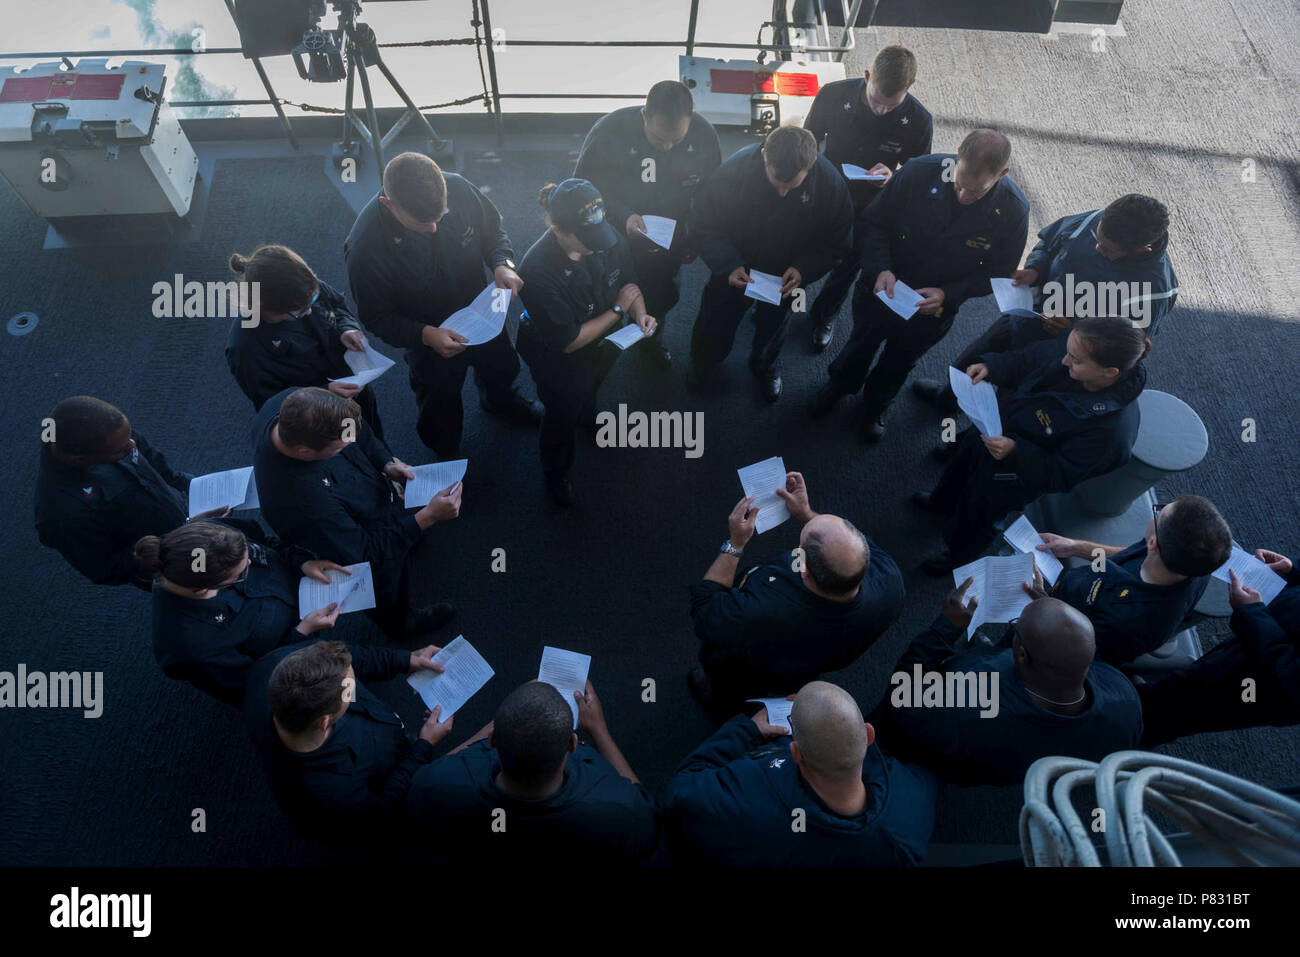 PACIFIC OCEAN (Oct. 3, 2016) Lt. Josh Sherwin, a Navy chaplain, leads a Rosh Hashanah ceremony on USS John C. Stennis' (CVN 74) fantail. Rosh Hashanah is a two-day celebration of the Jewish New Year, an opportunity to reflect on the past year and look ahead in the New Year. Sherwin, one of ten rabbis in the Navy, visited John C. Stennis at sea to provide religious services for the crew during the High Holy Days. John C. Stennis is underway conducting proficiency and sustainment training. Stock Photo